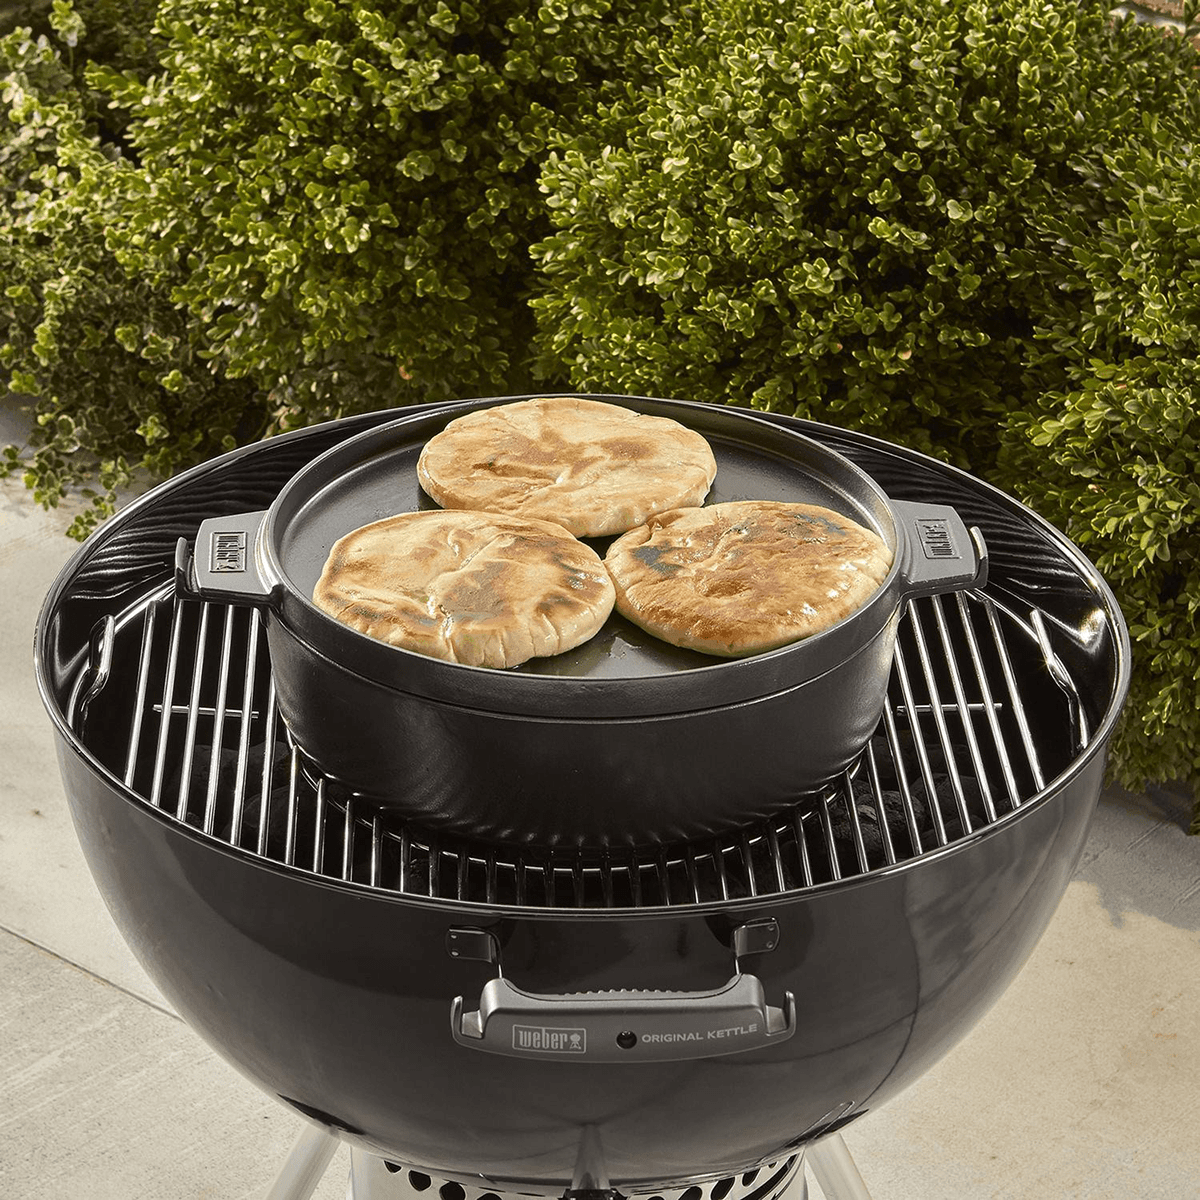 11 Weber Grill Accessories for Accessories Grilling, Better Must-Have Grill